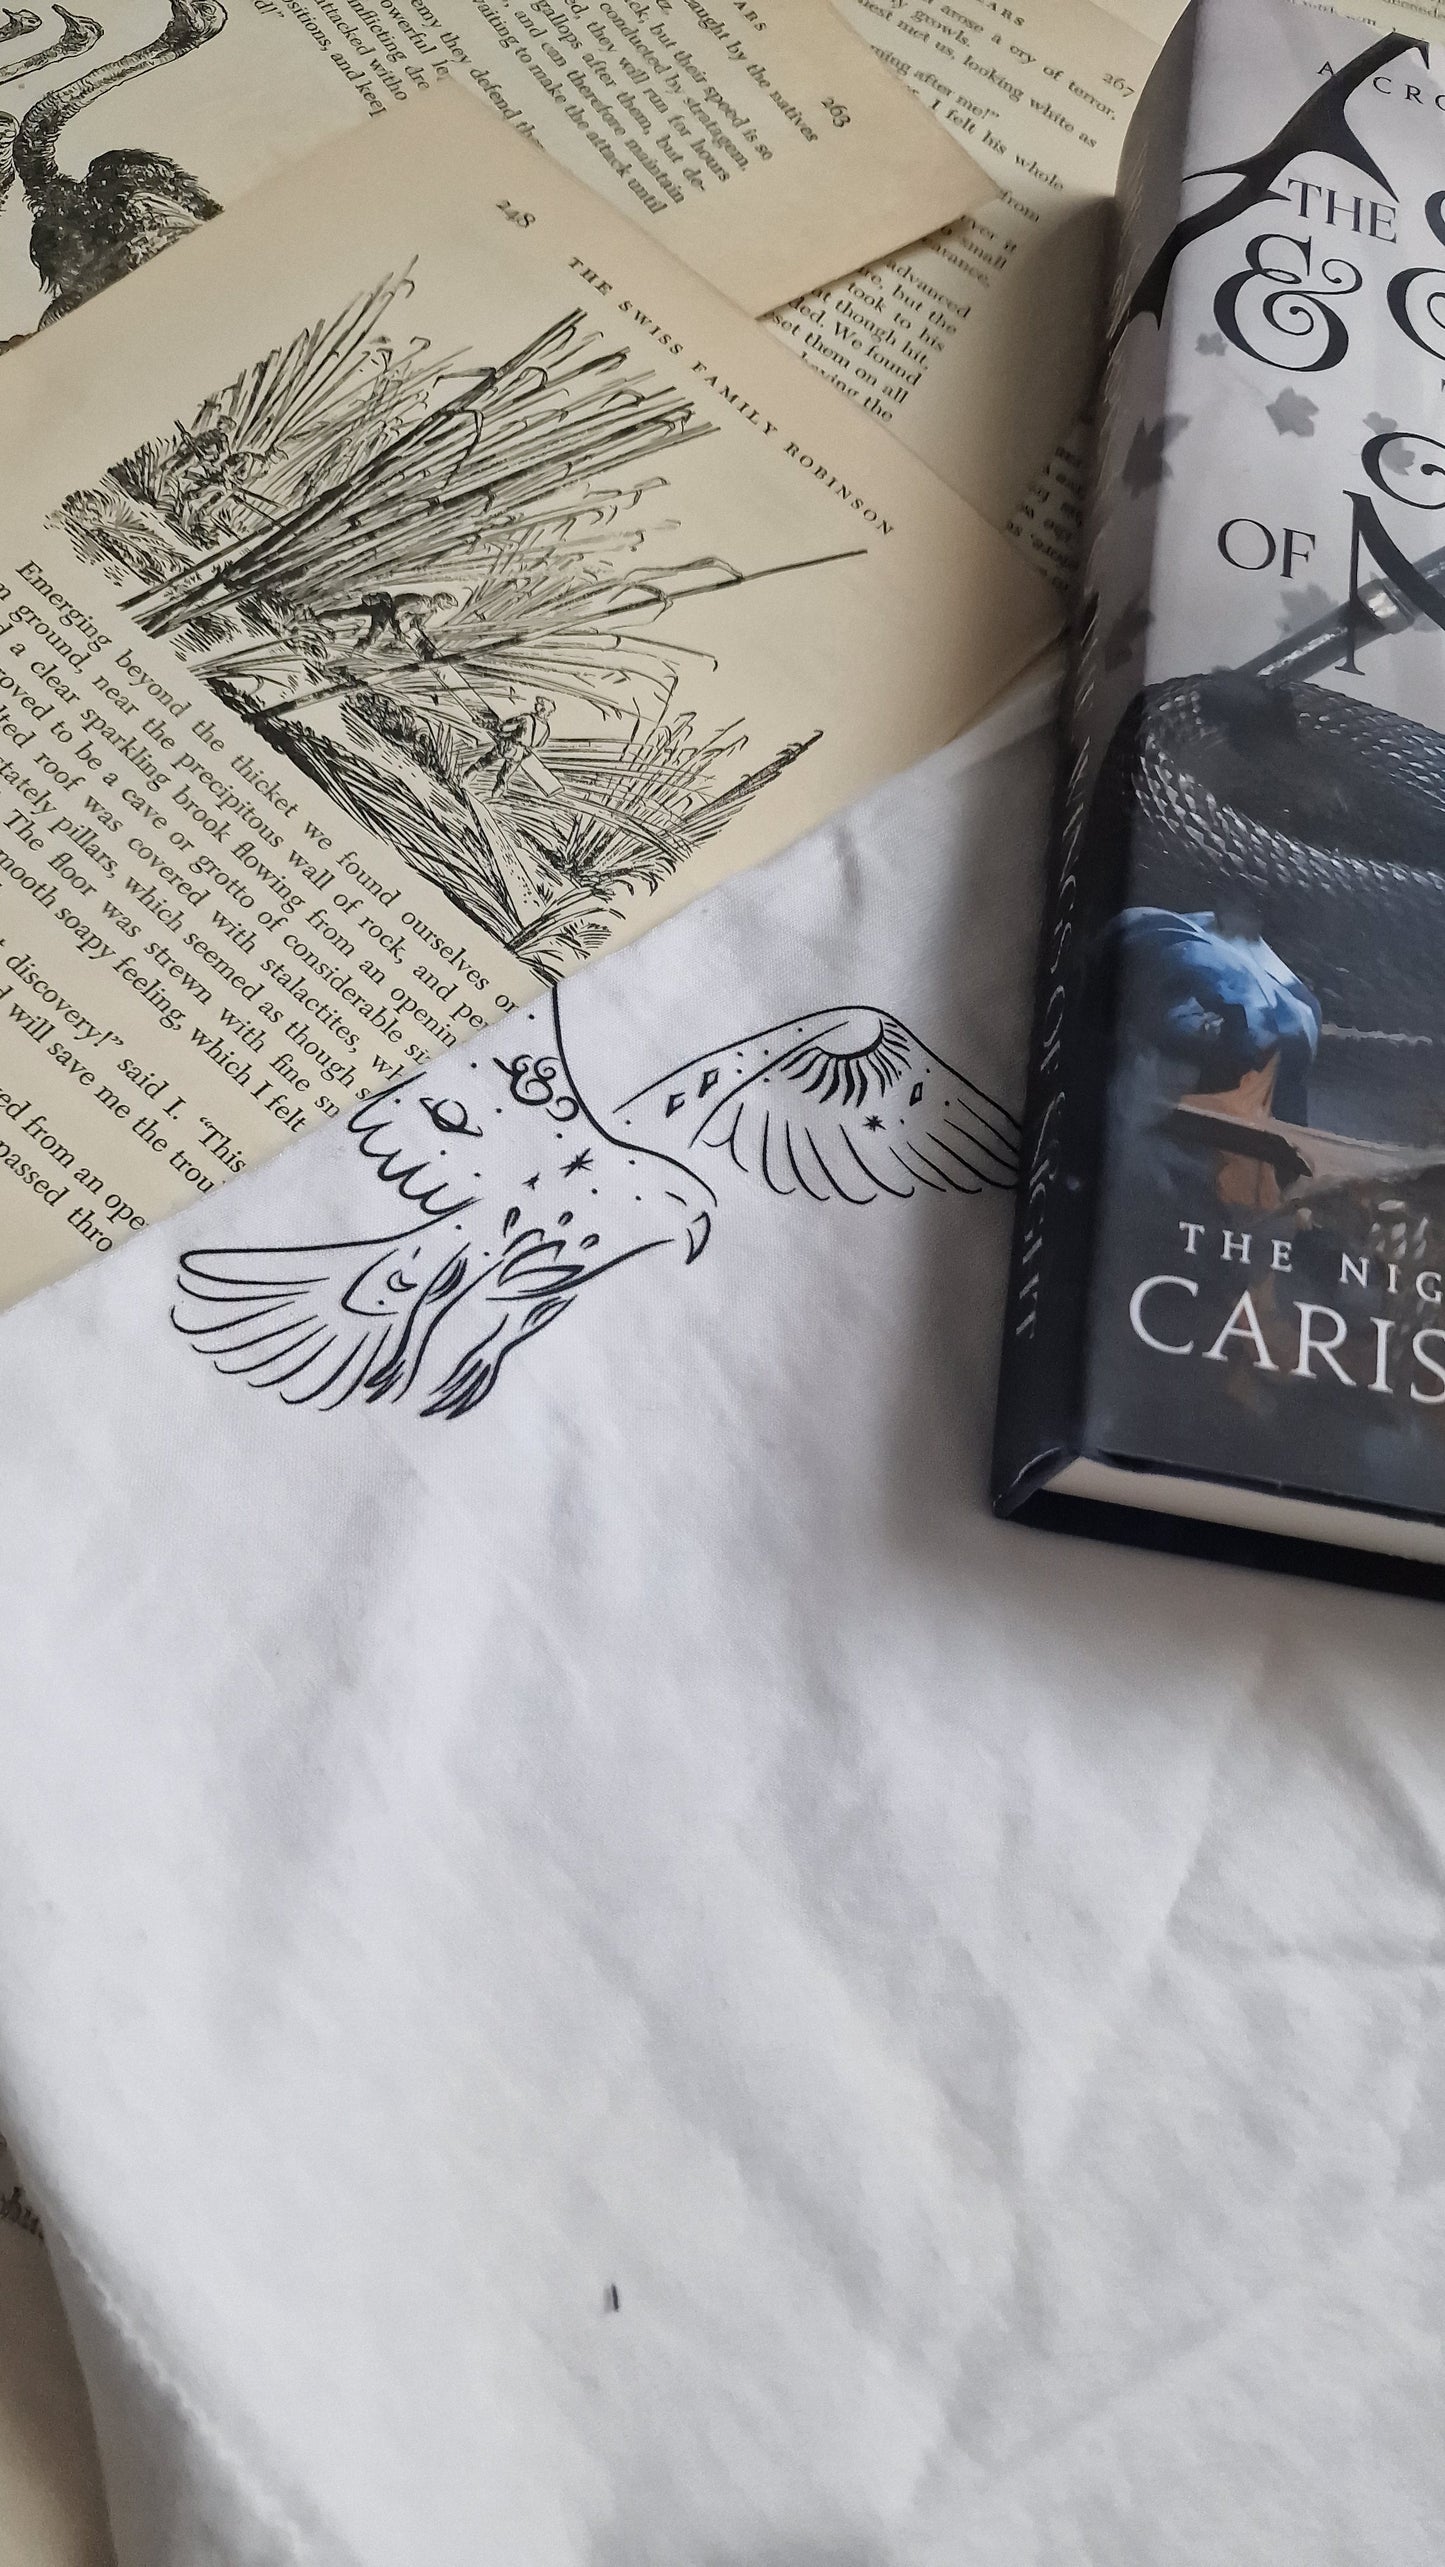 Even Snakes Run for Cover Joggers and Tee Set - Carissa Broadbent - The Serpent and The Wings of Night Officially Licensed Merch